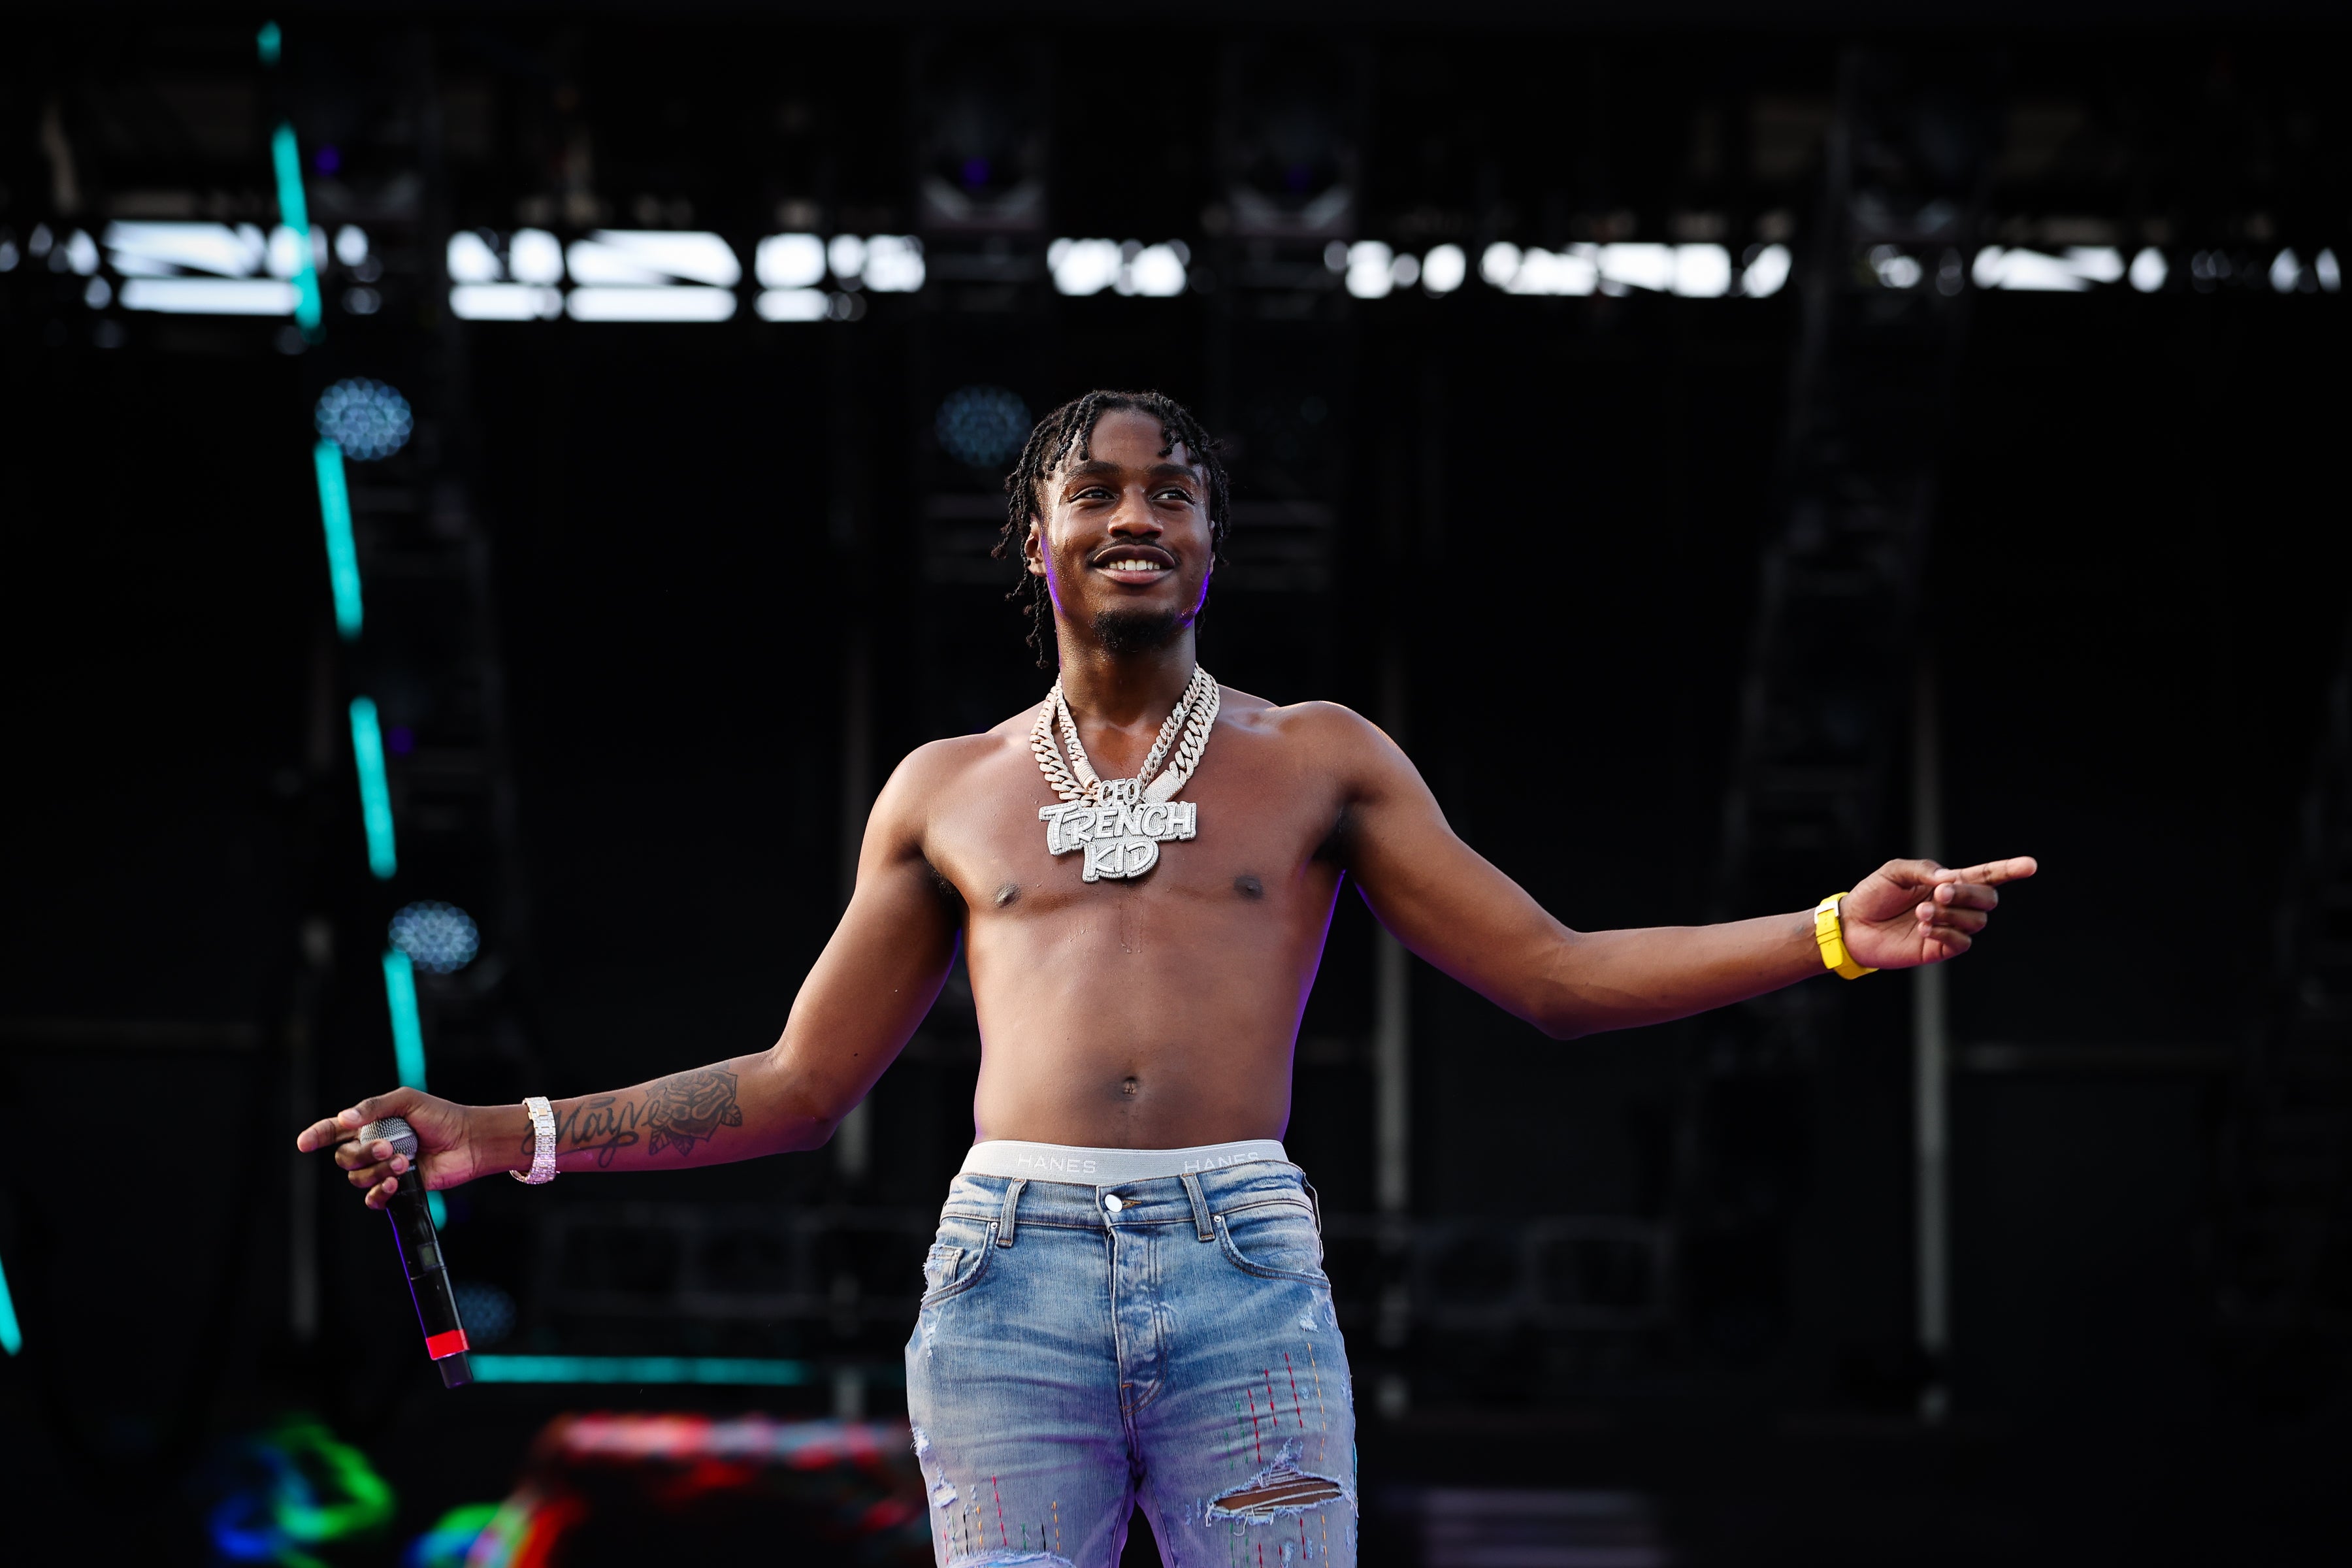 File: Lil Tjay performs on stage in Miami Gardens, Florida, on 25 July 2021